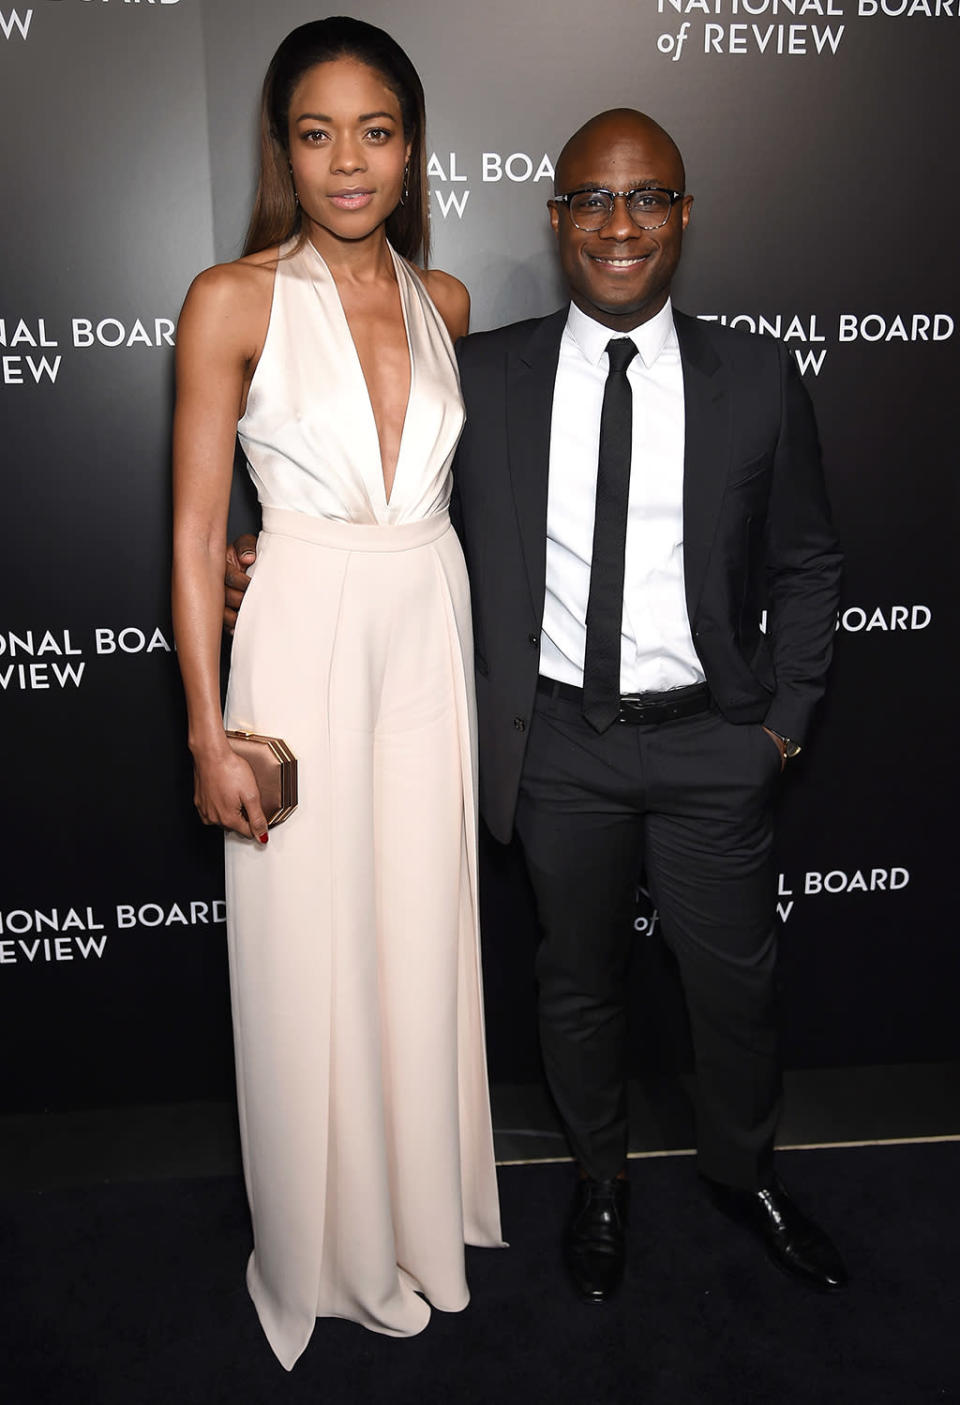 <p>It’s a big night for ‘Moonlight’ at the National Board of Review Gala — Harris wins for Best Supporting Actress and Jenkins wins for Best Director. (Photo: Dimitrios Kambouris/WireImage) </p>